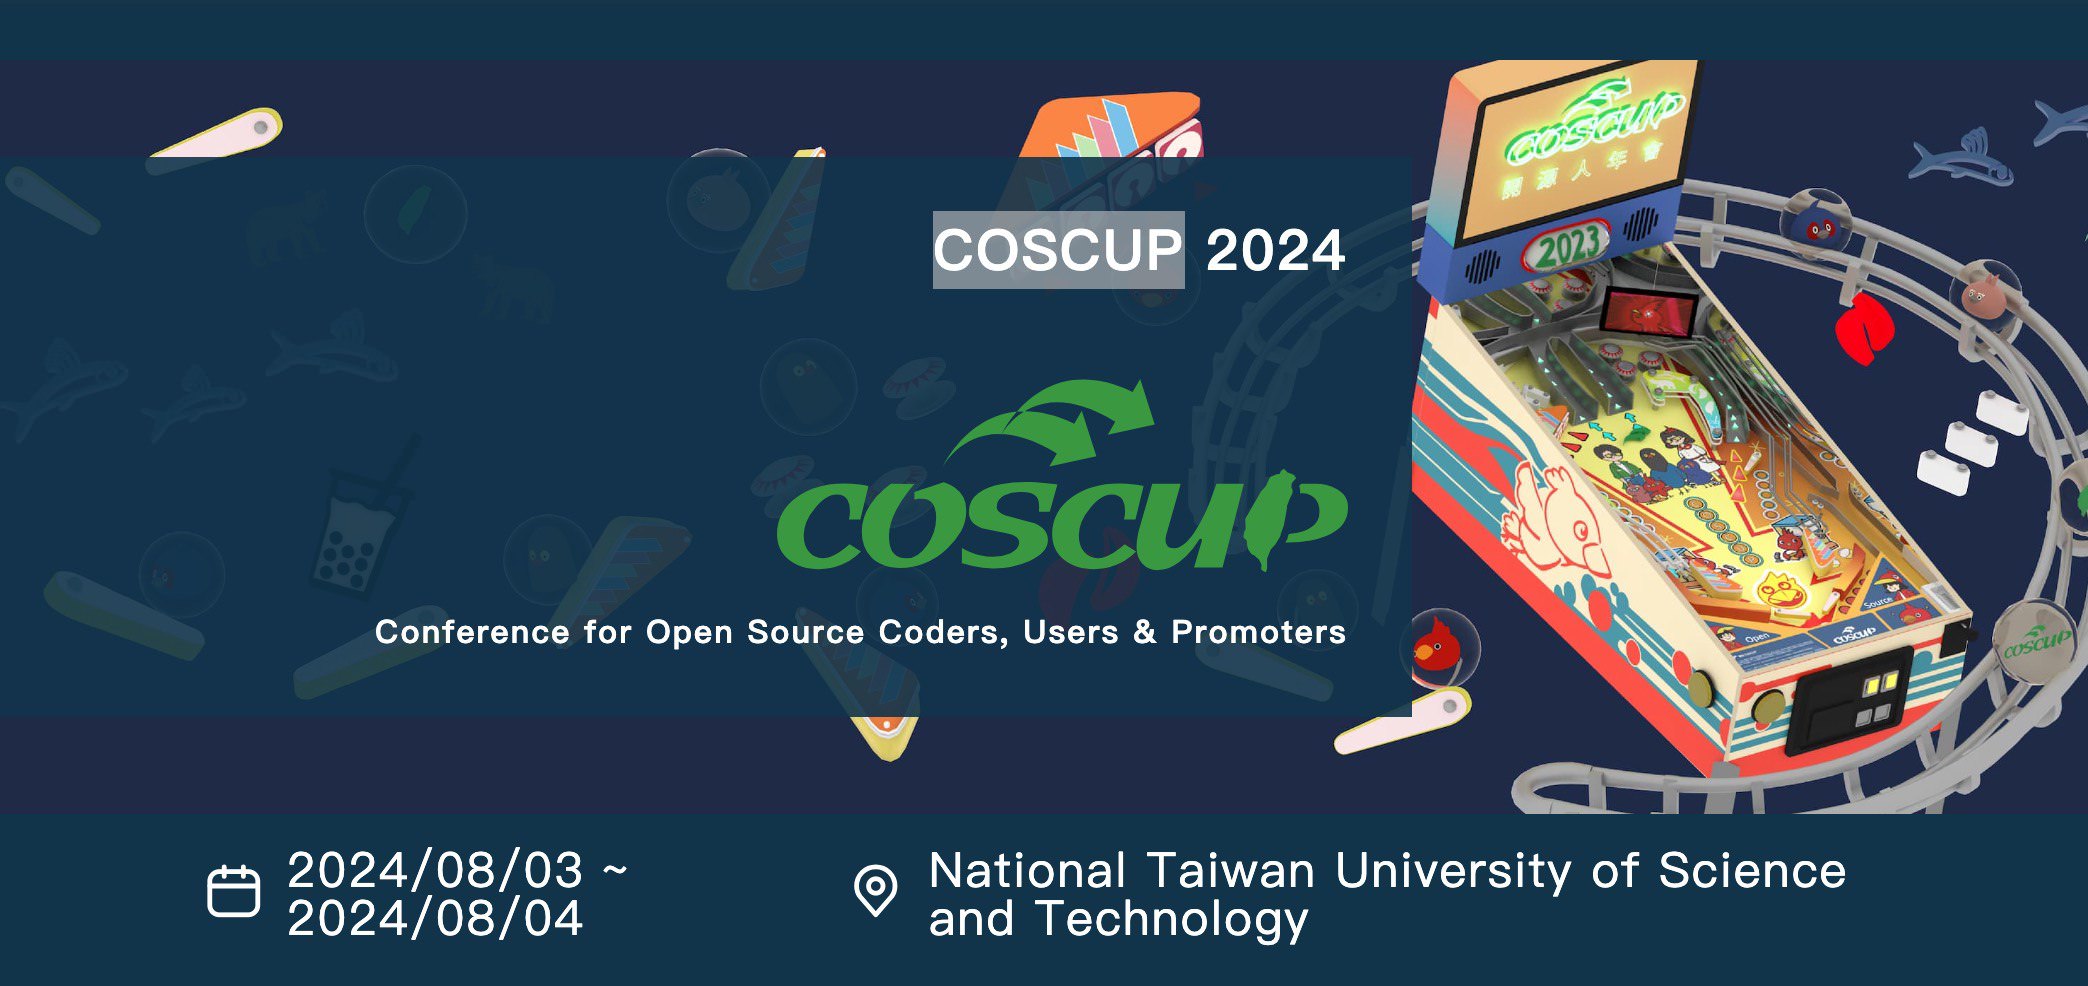 COSCUP 2024